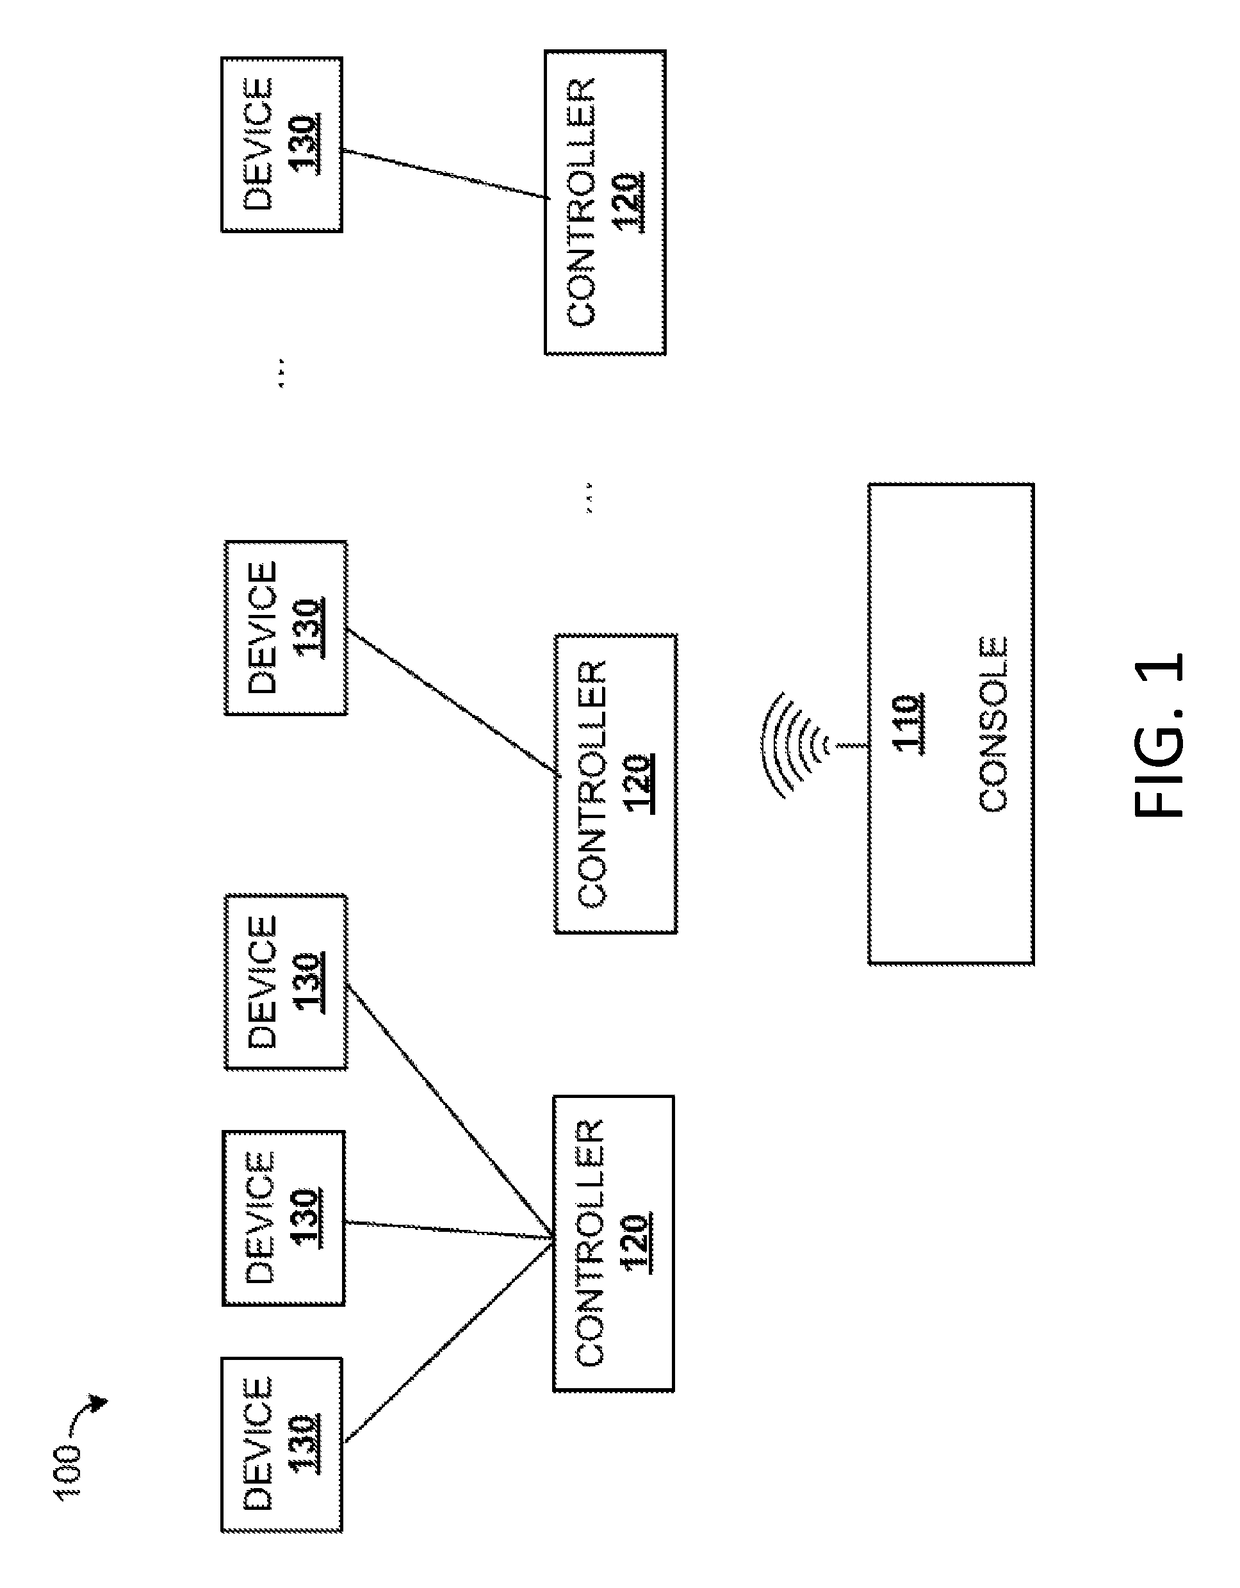 Method and device capable of unique pattern control of pixel LEDs via smaller number of DMX control channels